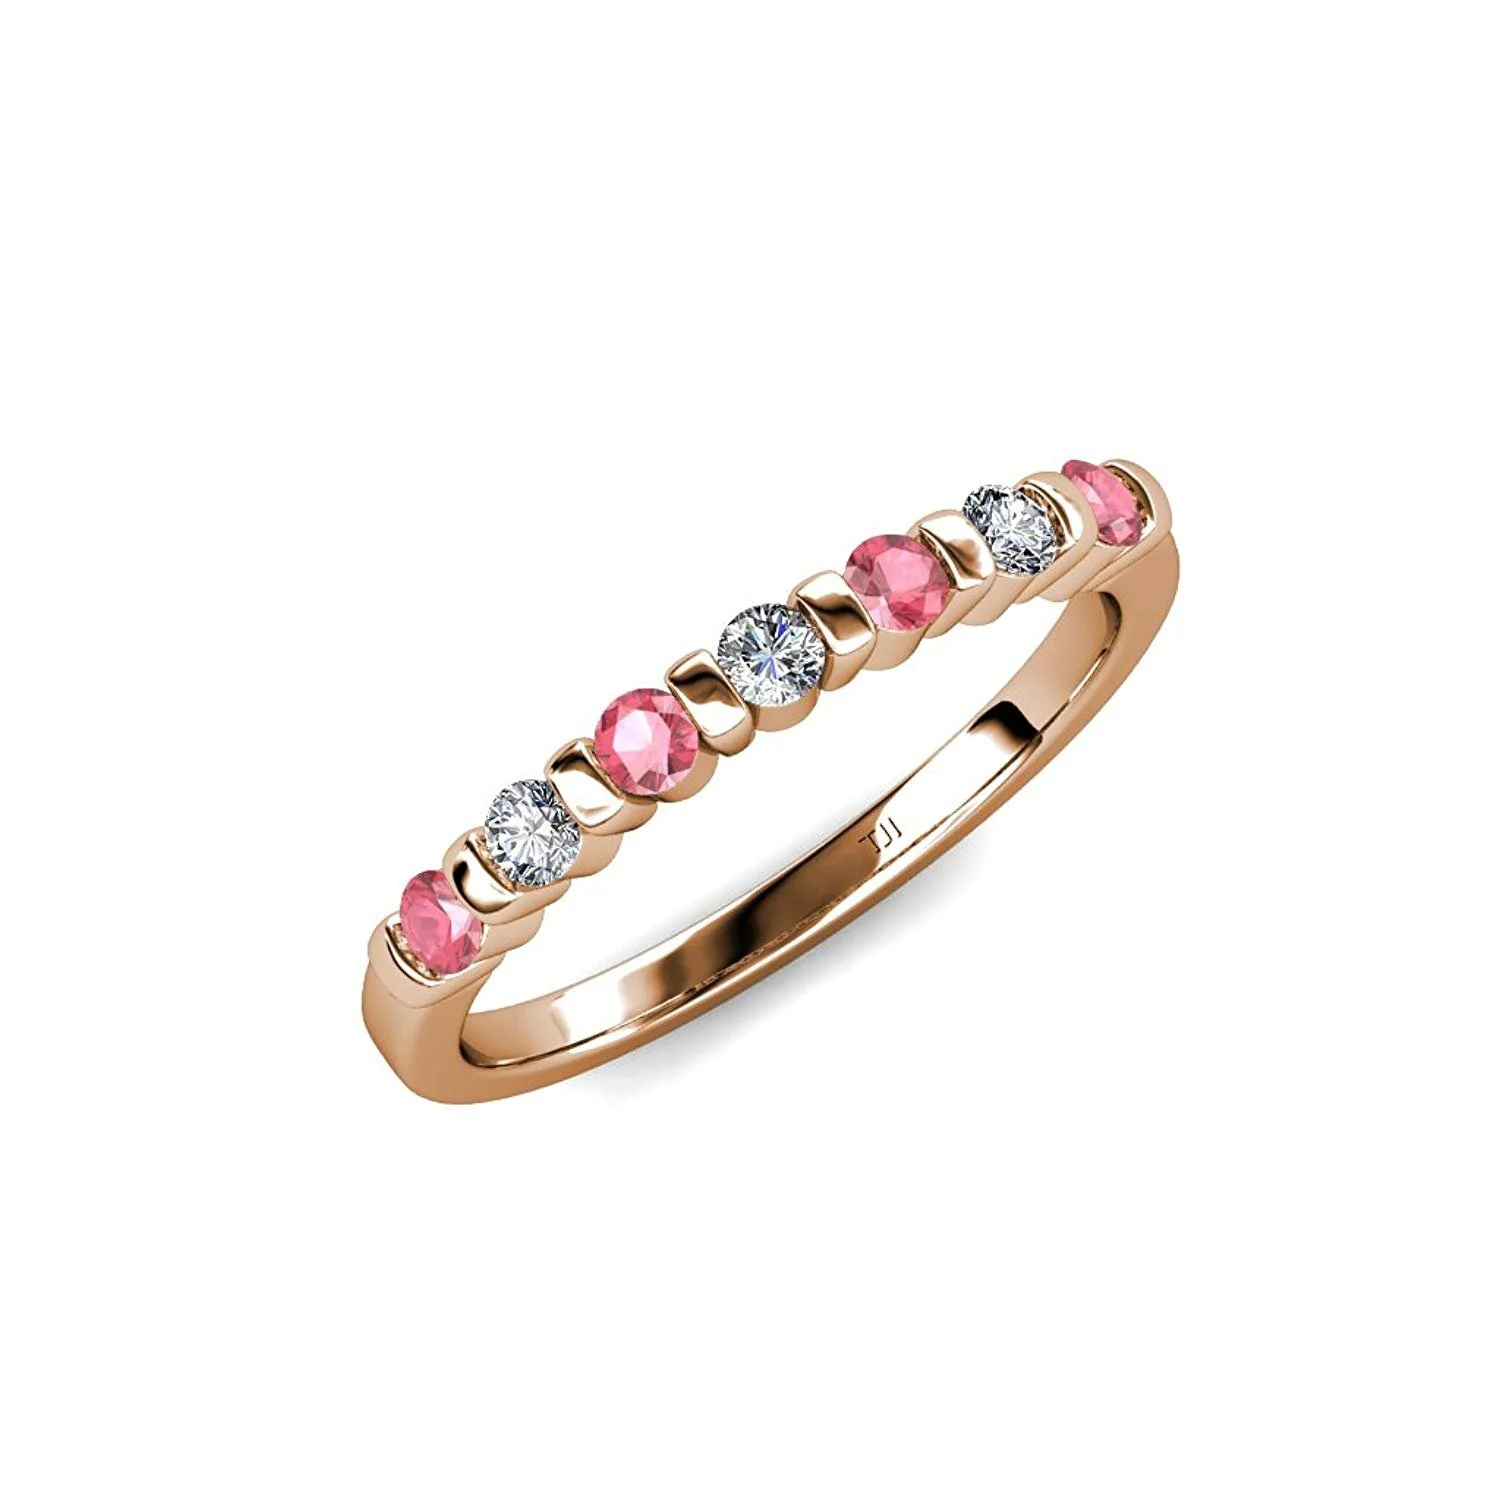 Pink Tourmaline and Diamond 7 Stone Wedding Band 0.22 ct tw in 14K Rose Gold.size 5